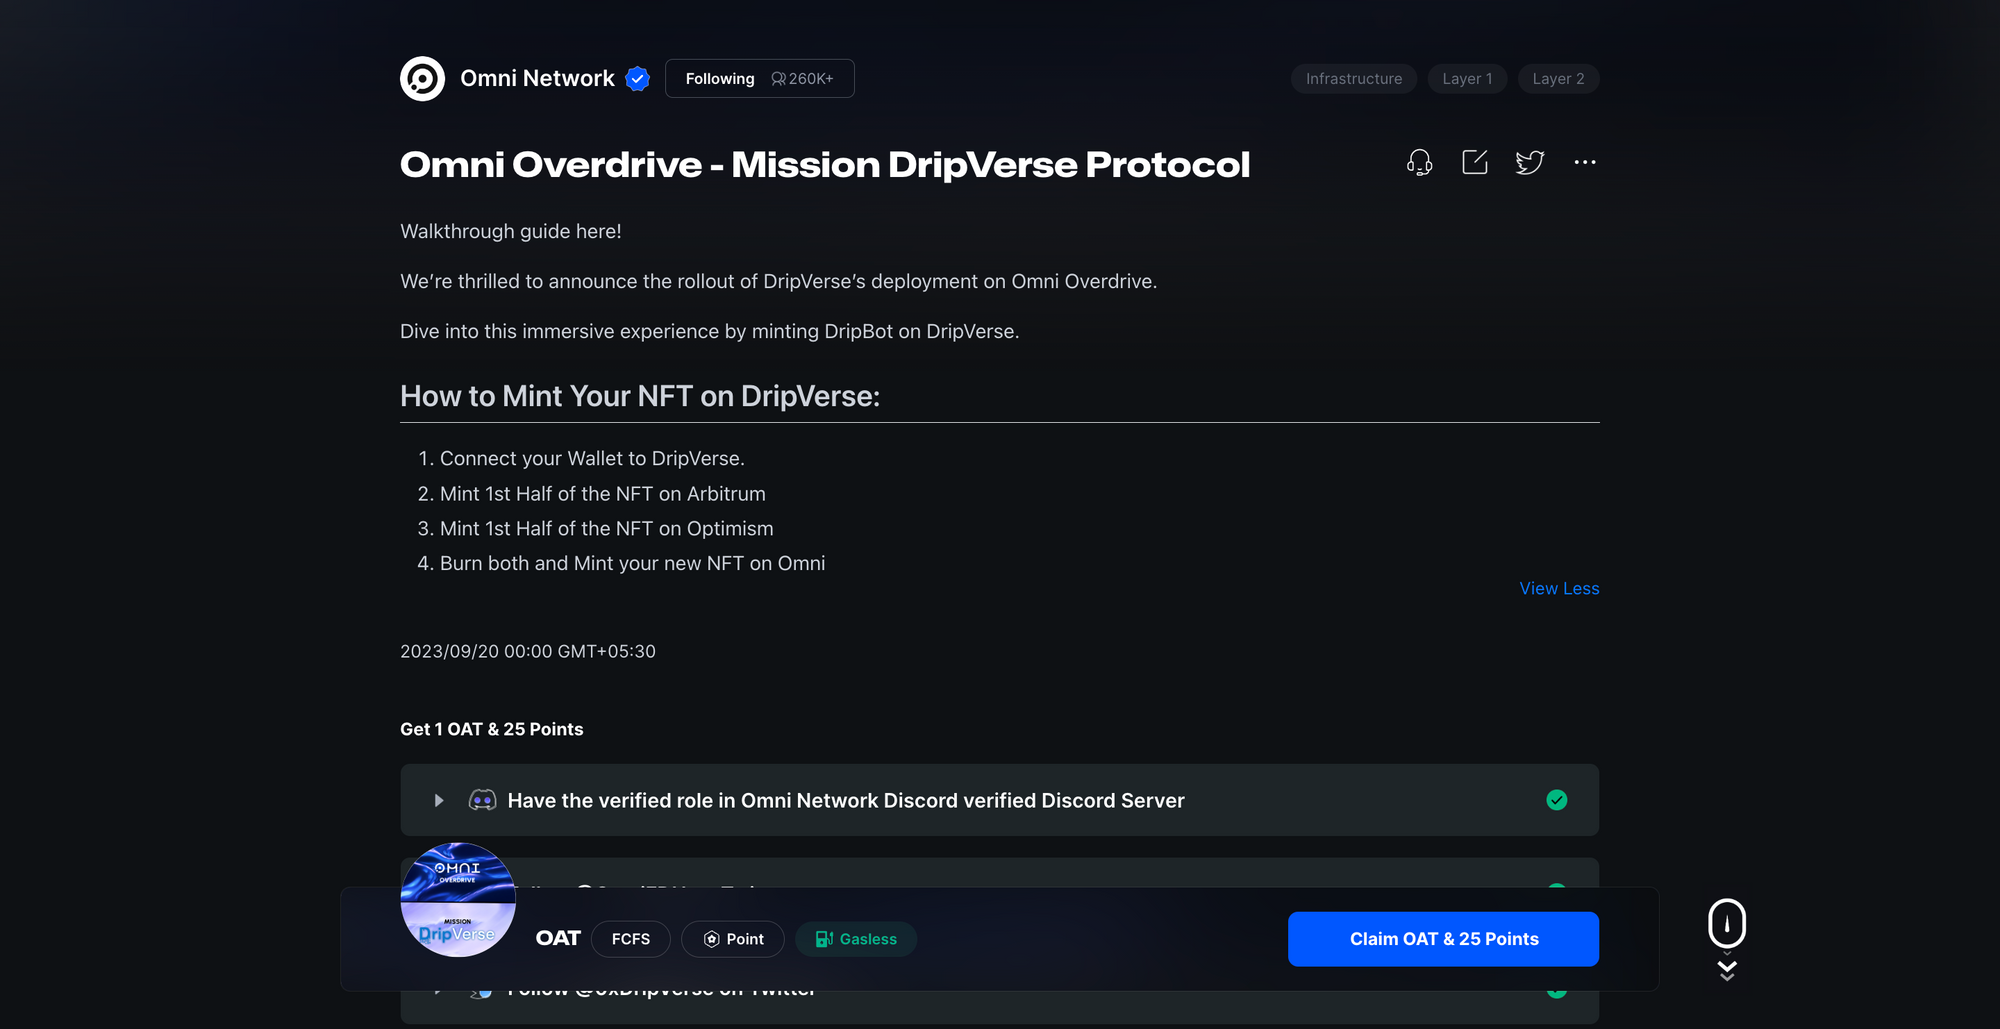 Claim Your Omni Overdrive - Mission DripVerse Protocol OAT from Galxe